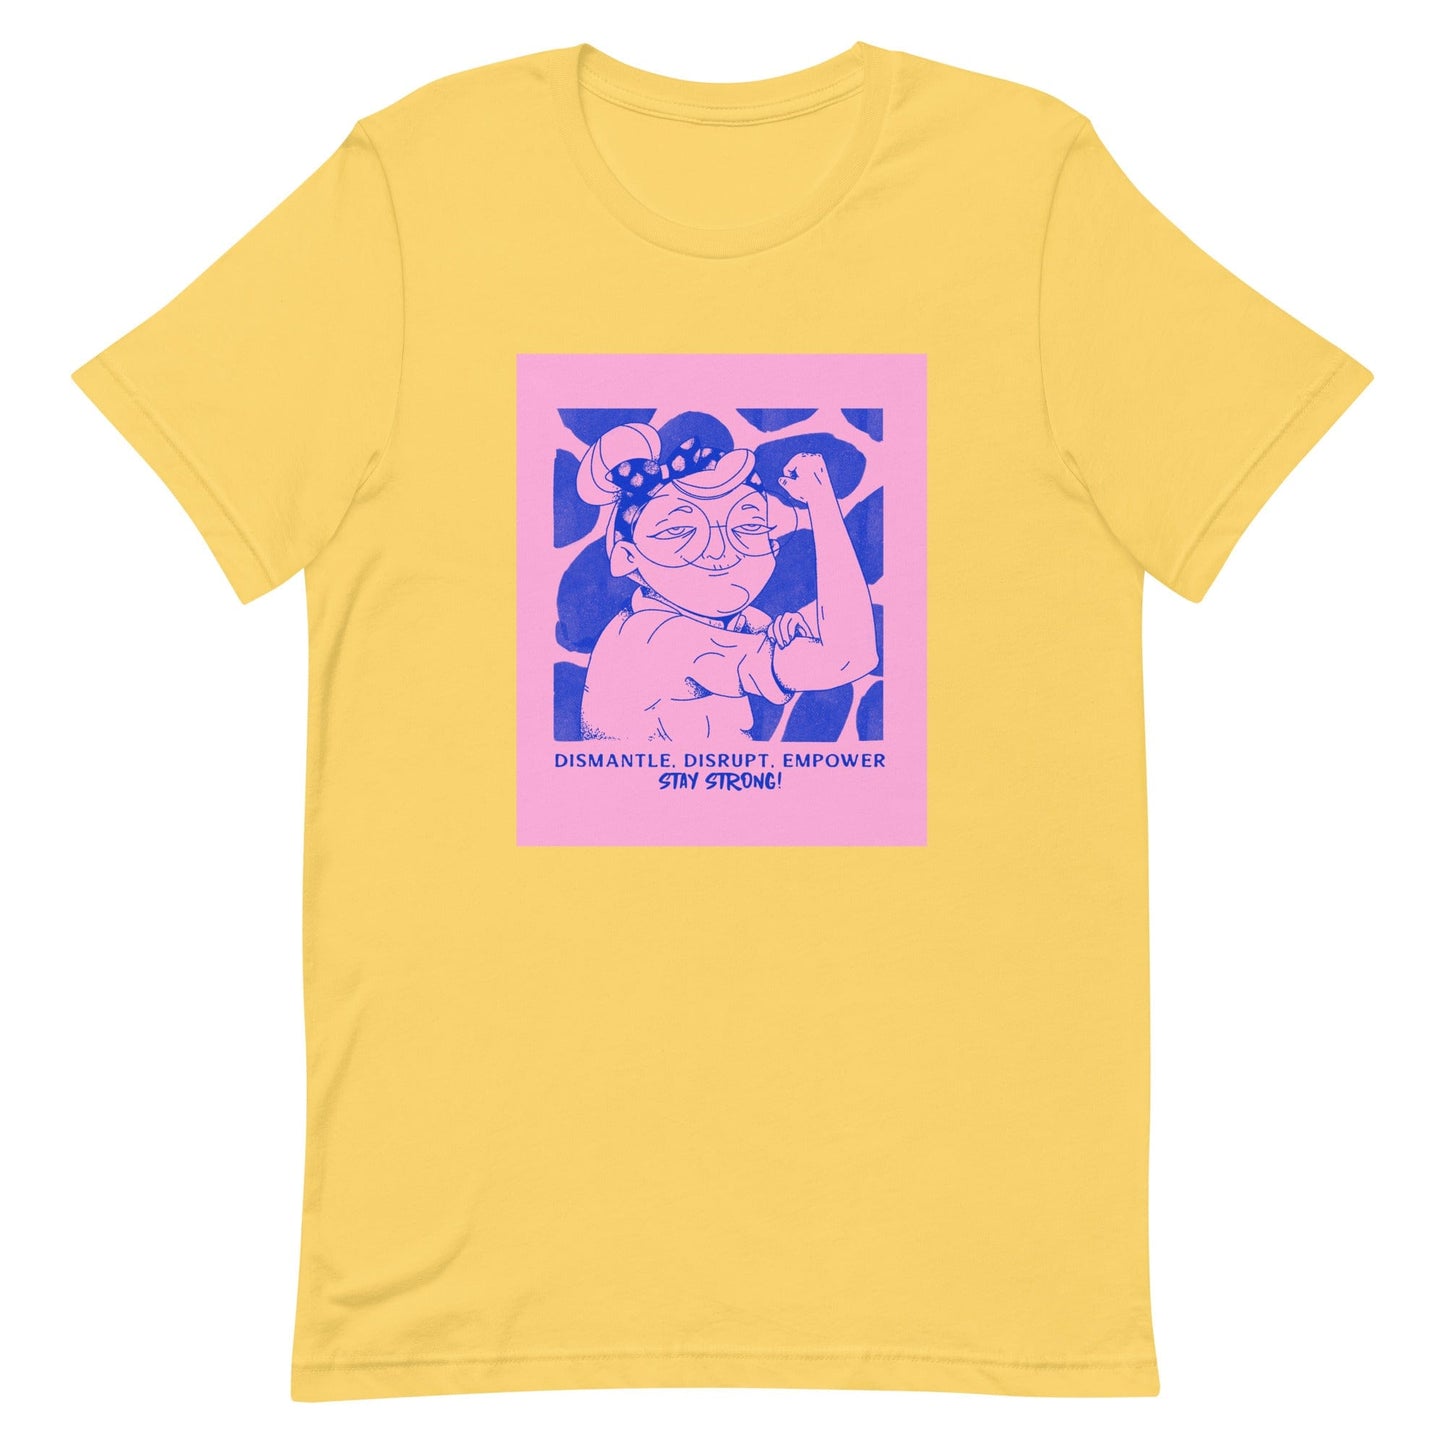 stay-strong-feminist-tshirt-yellow-apparel-at-feminist-define-front